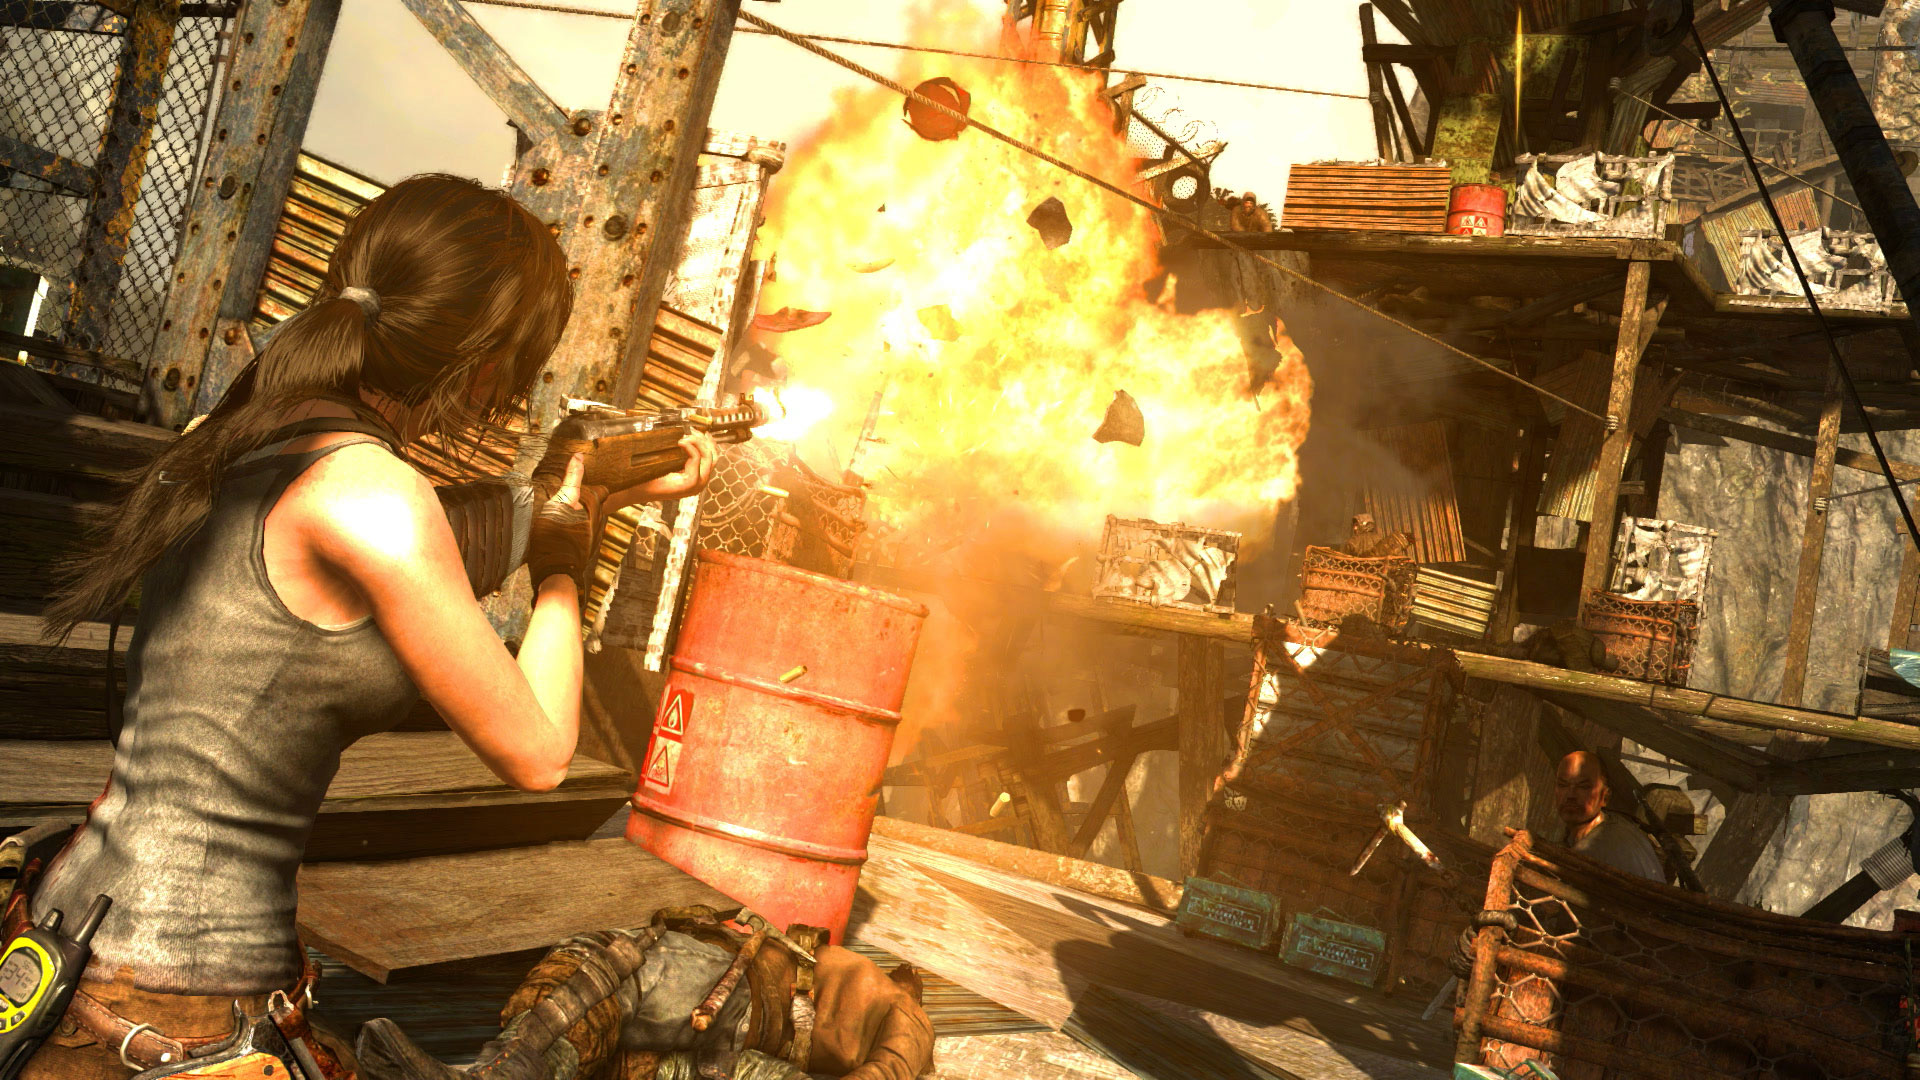 Game info be. Tomb Raider Definitive Edition ps4. Tomb Raider 2013 ps4. Tomb Raider 2013 Definitive Edition.